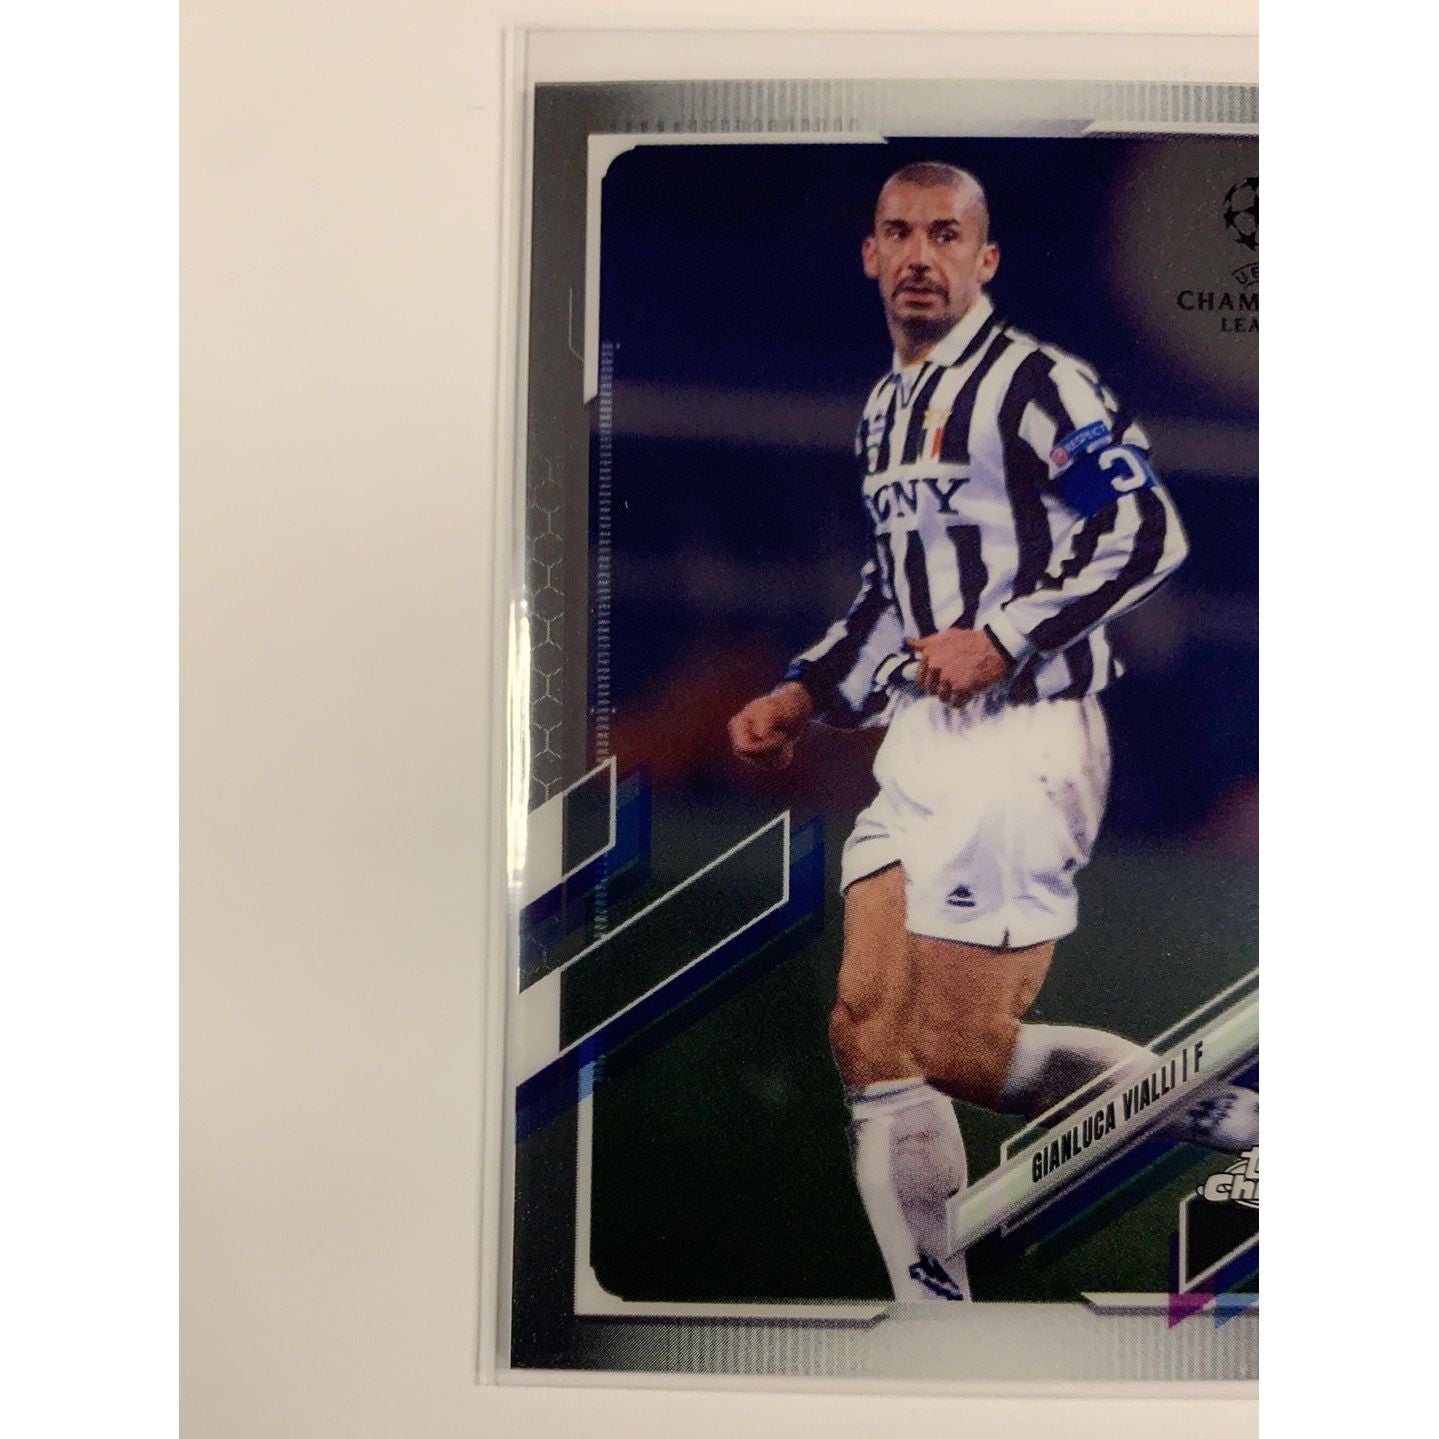  2021 Topps Chrome UEFA Champions League Gianluca Vialli Base #52  Local Legends Cards & Collectibles